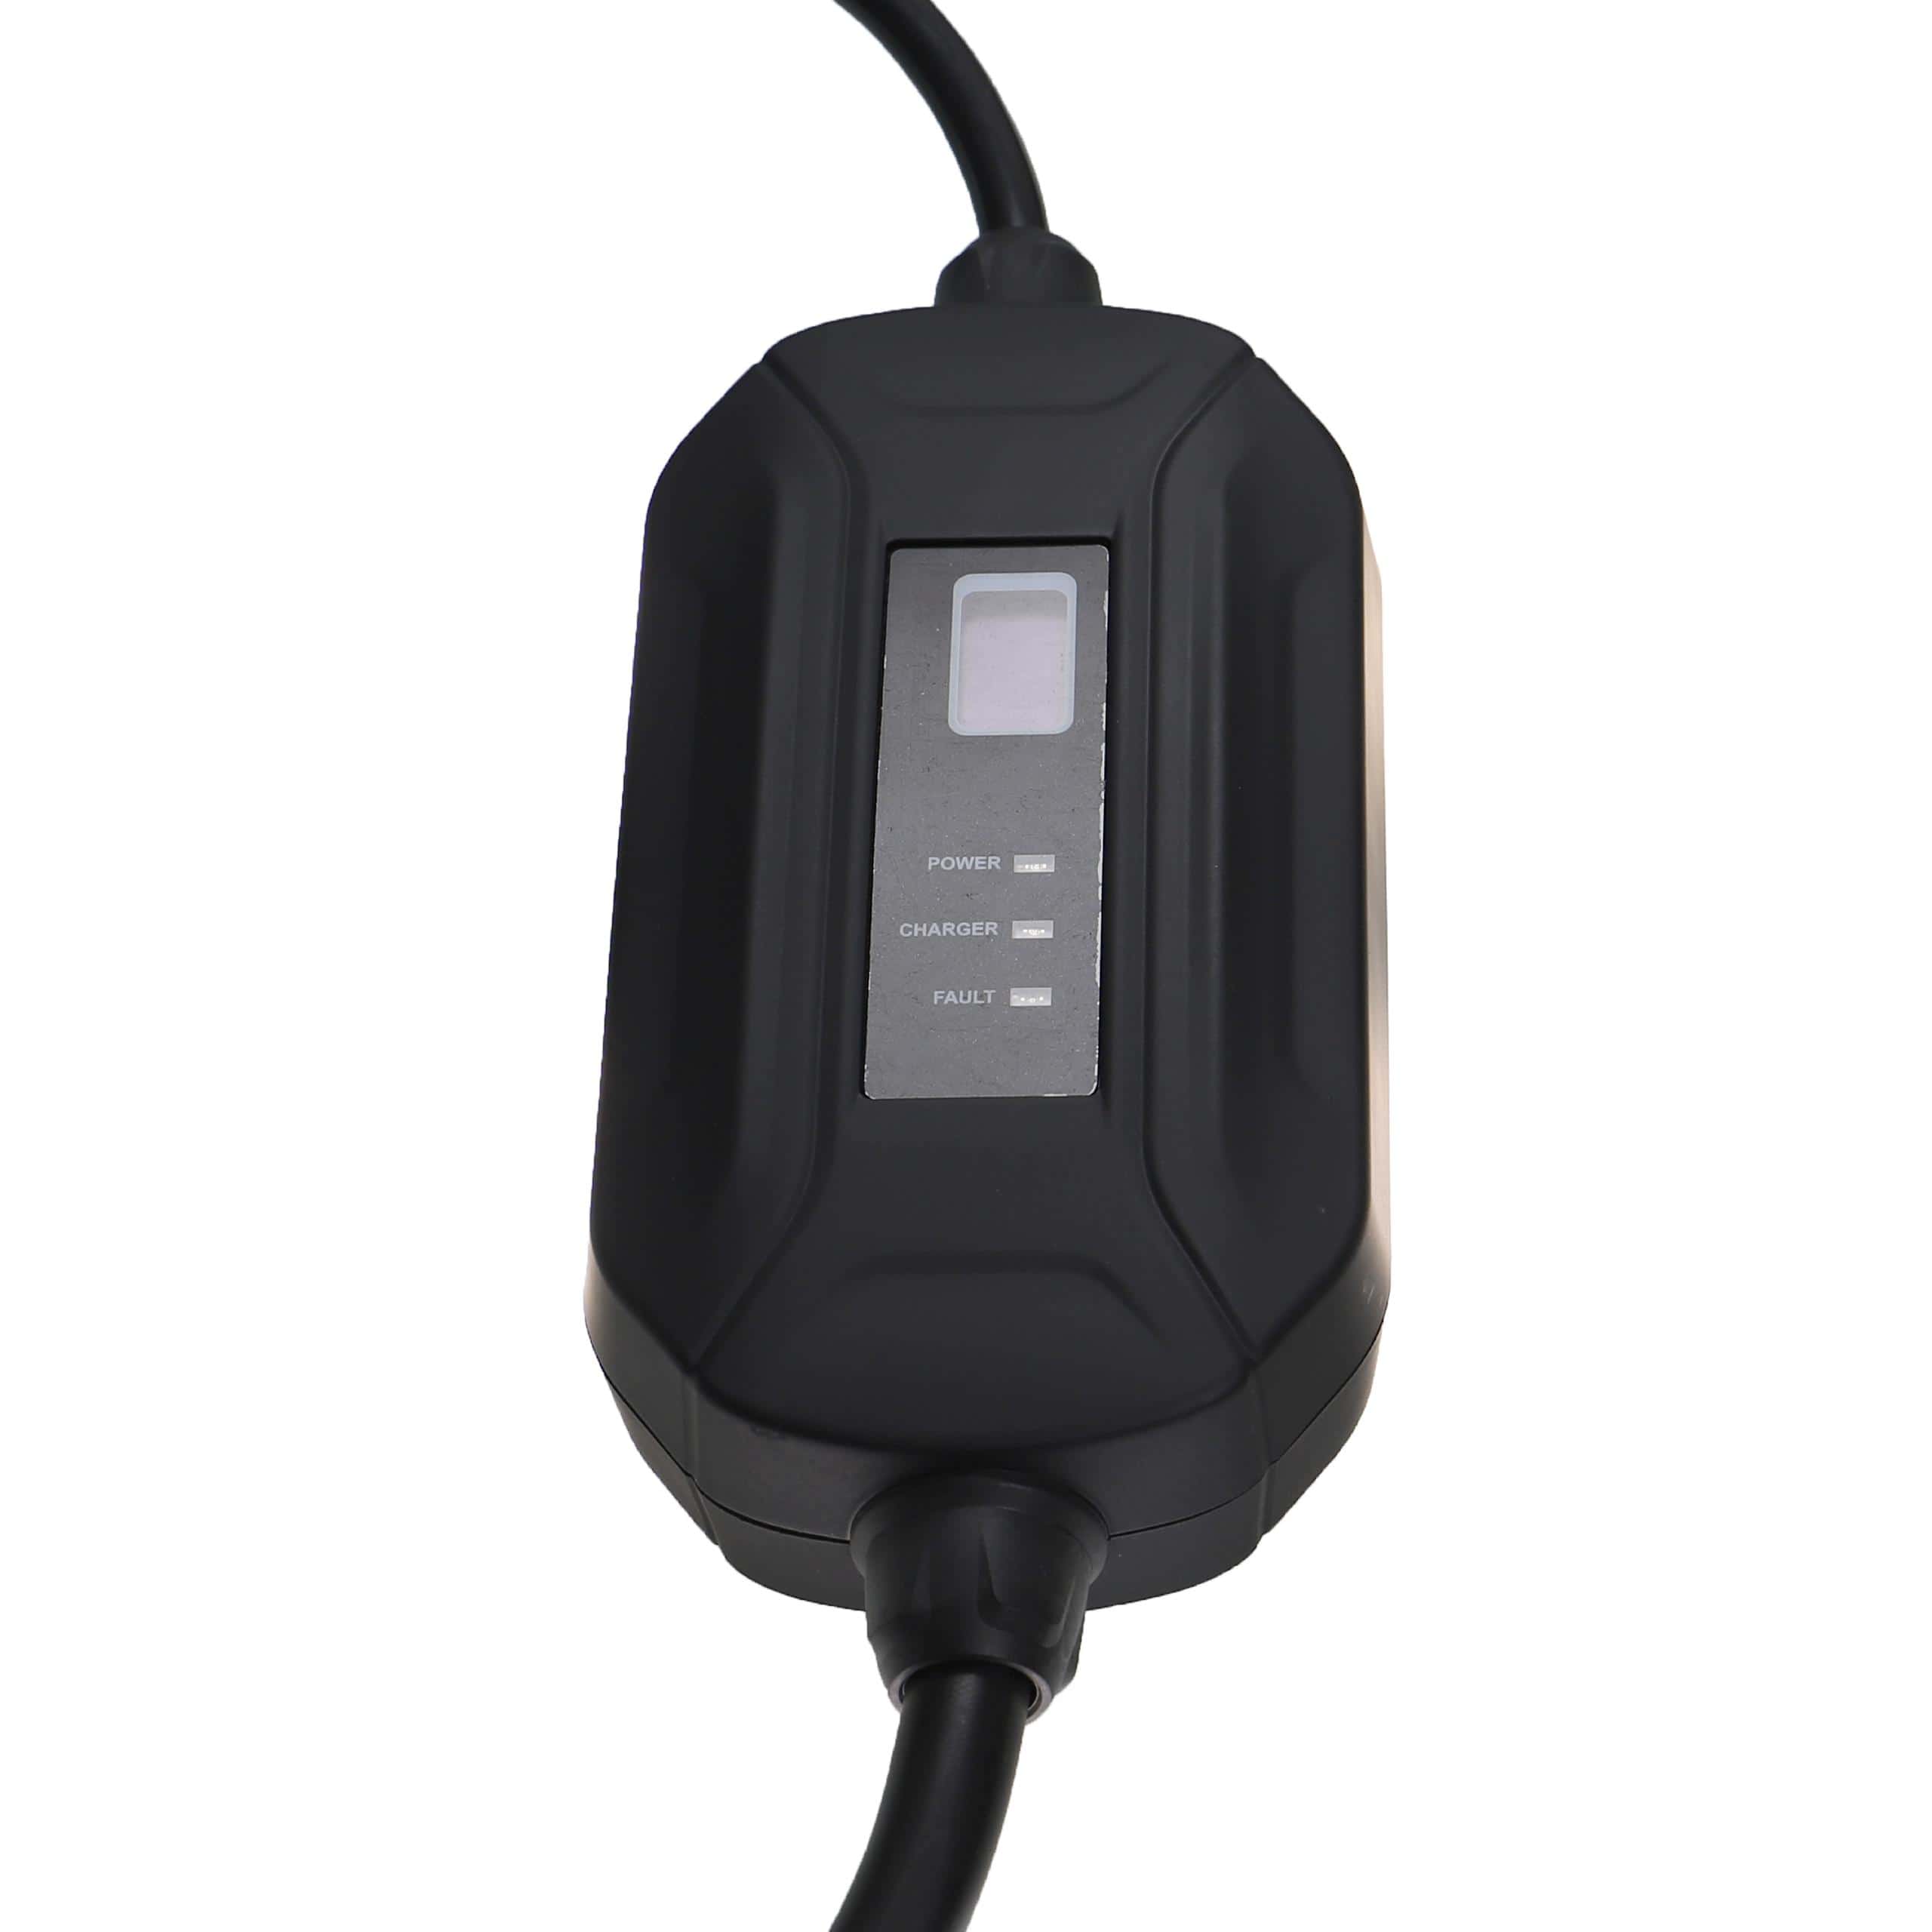 Charging Cable for Electric Car, Plug-In Hybrid - Type 2 to Euro Socket Cable, Single-Phase, 16 A, 3.5 kW, 5 m